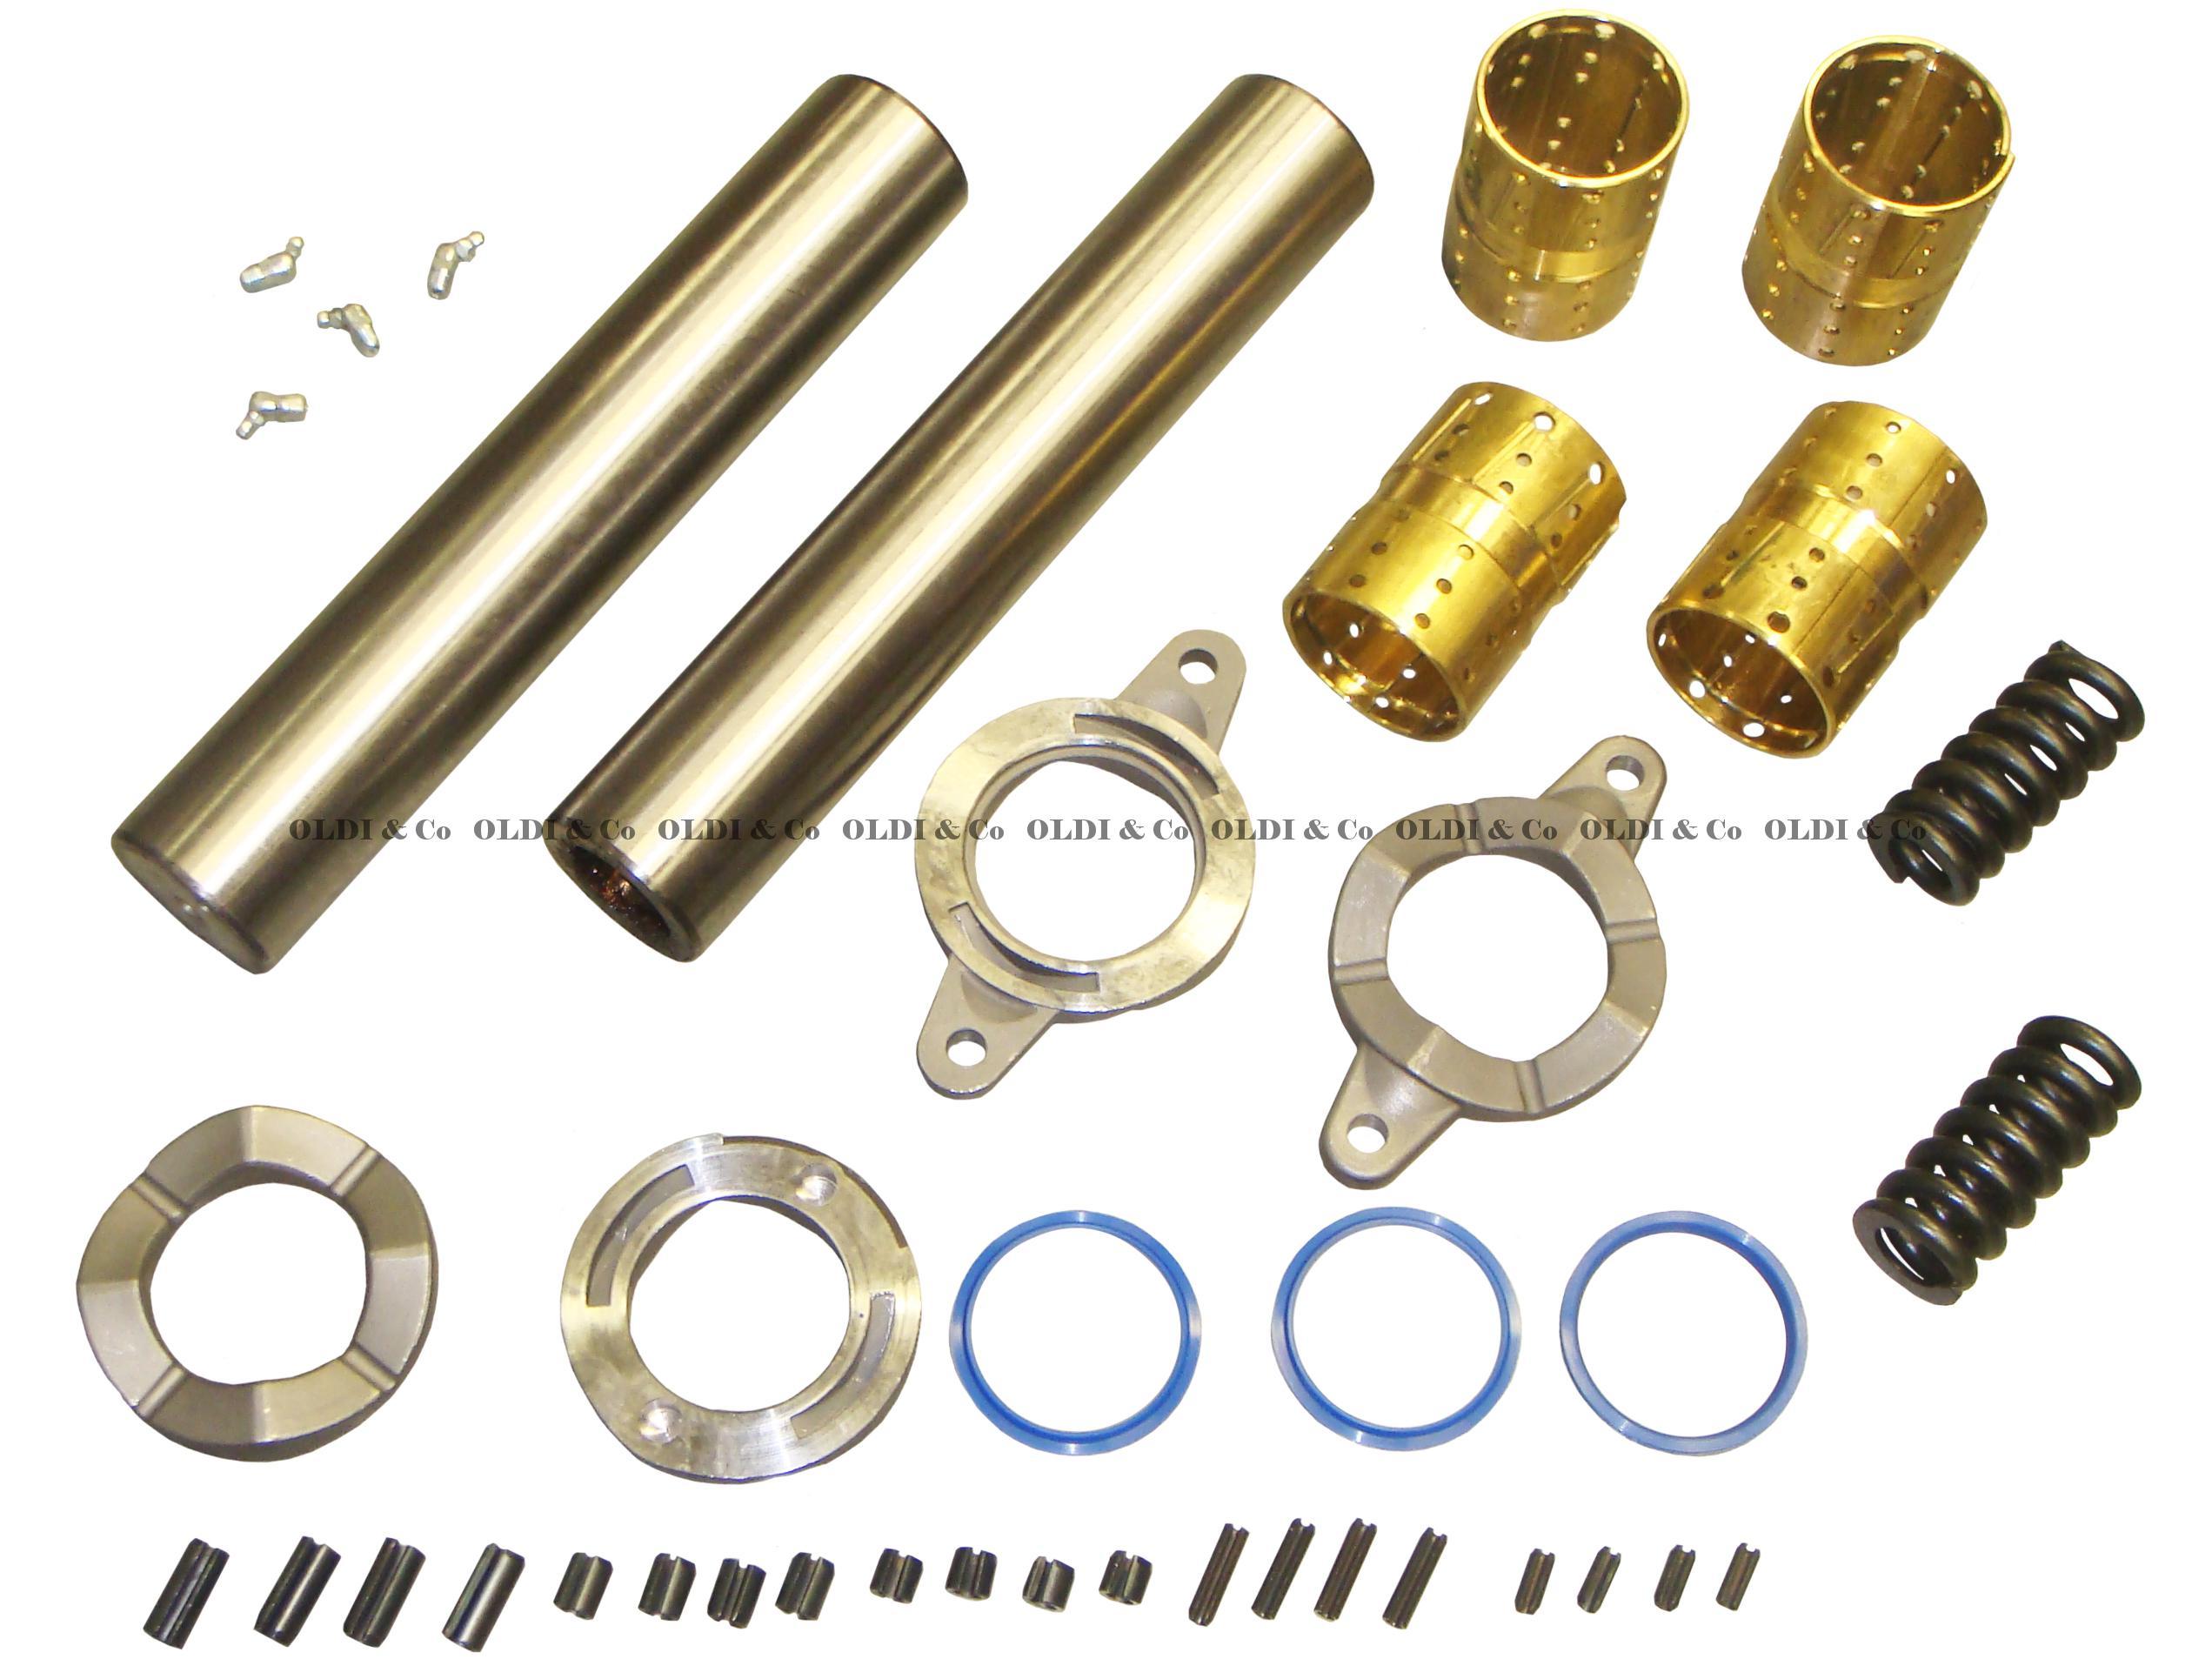 34.074.17245 Suspension parts → King pin - steering knuckle rep. kit